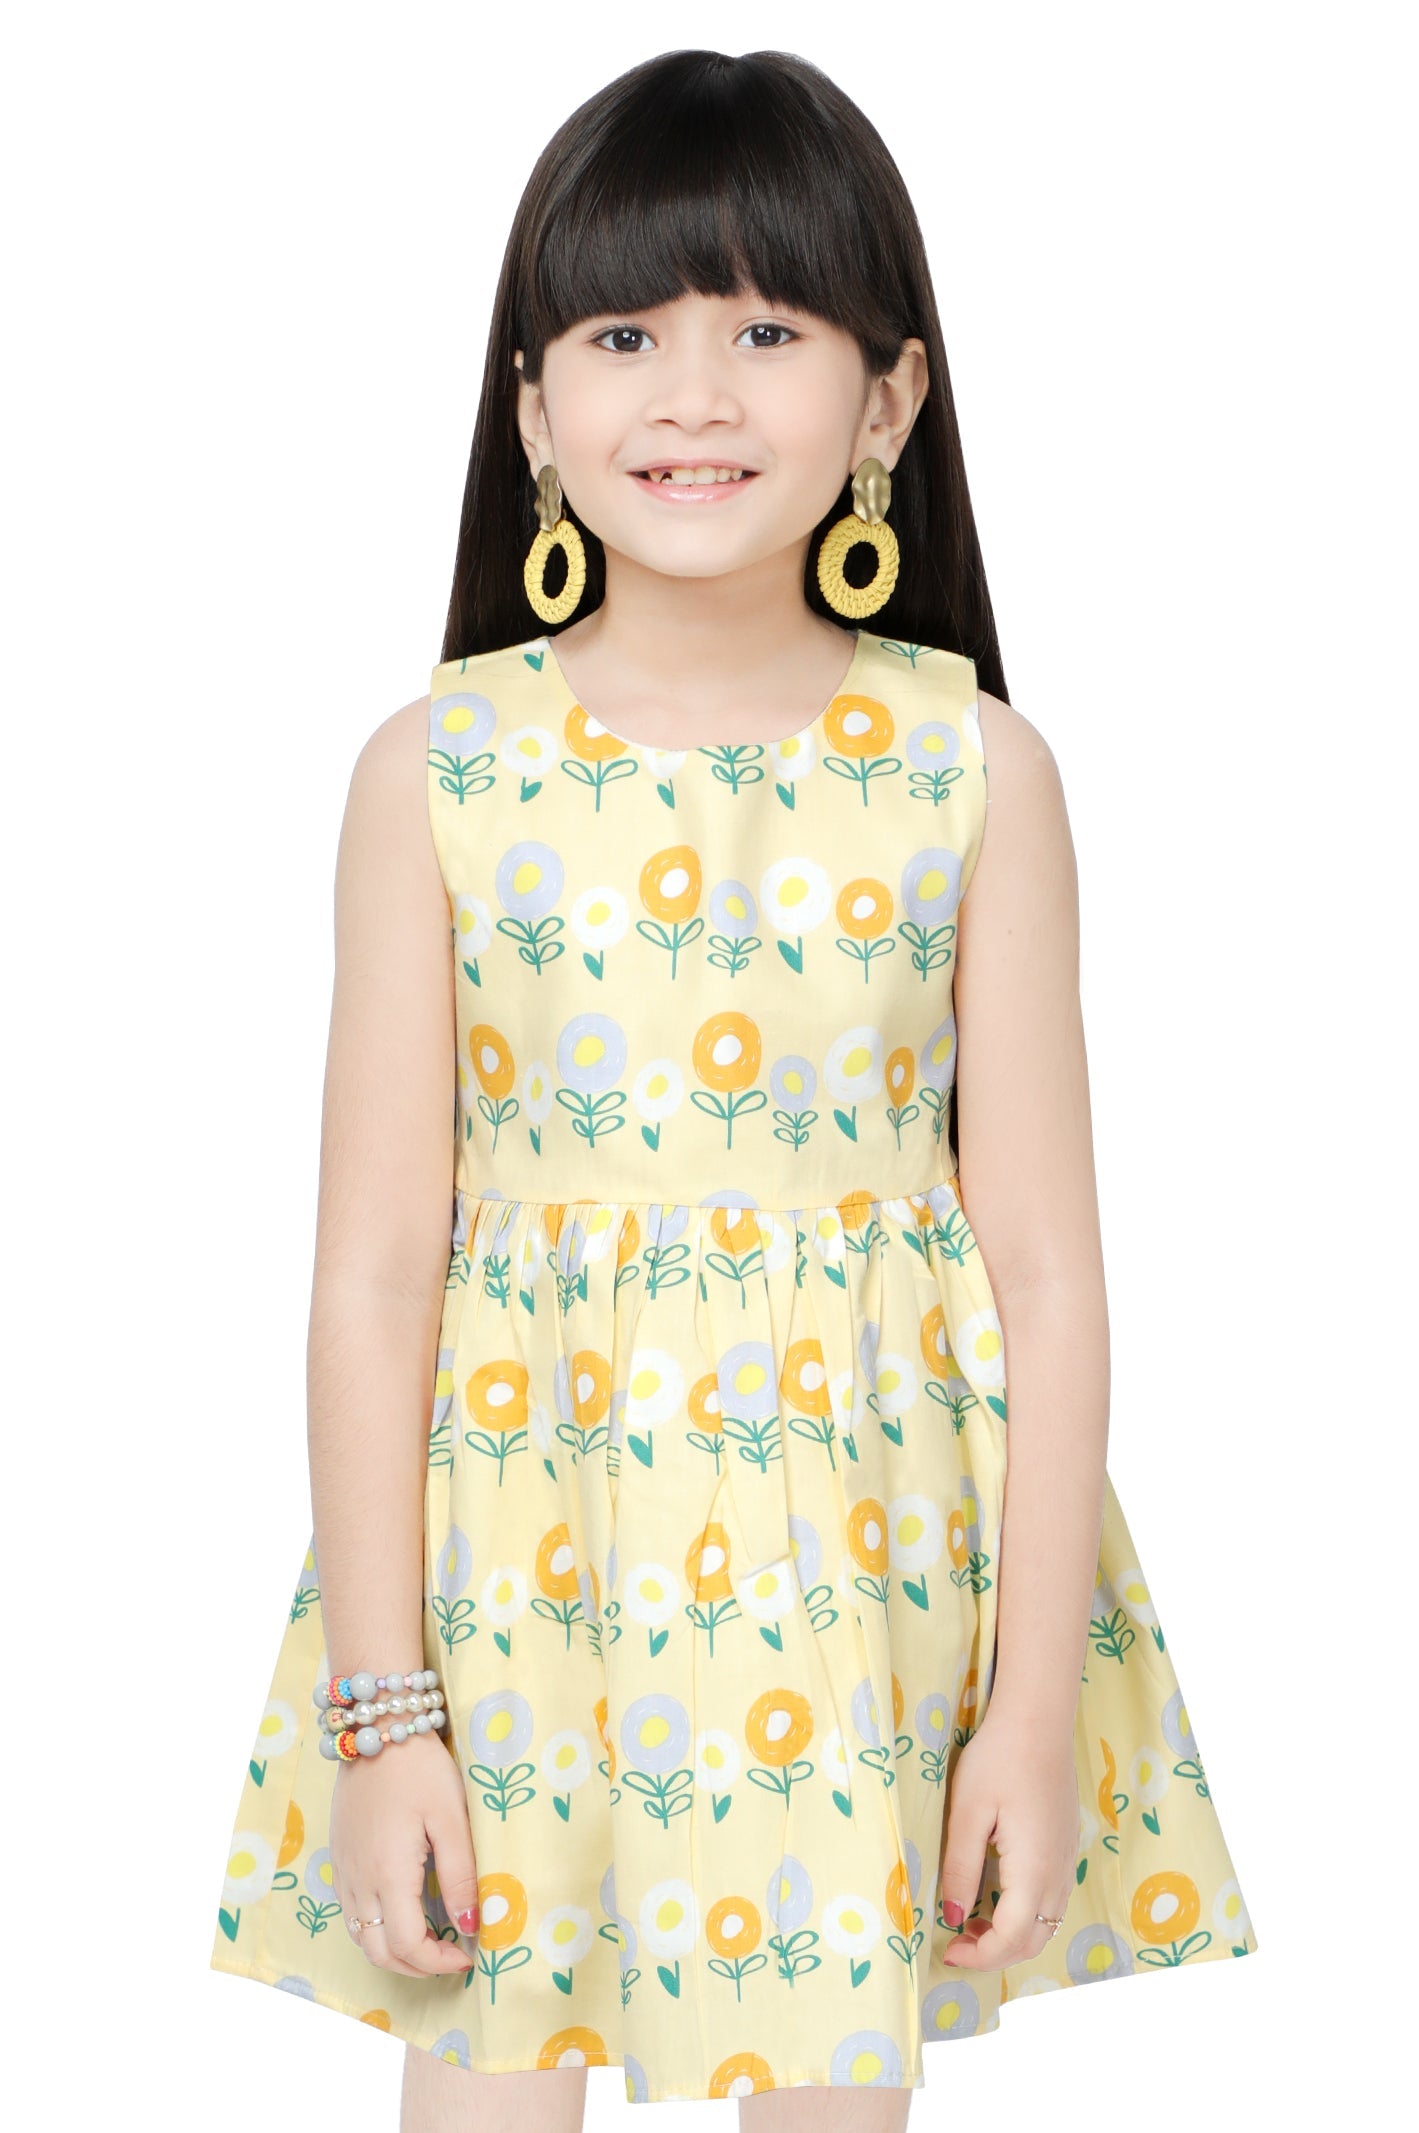 Girls Frock in Yellow SKU: KGL-0333-YELLOW - Diners